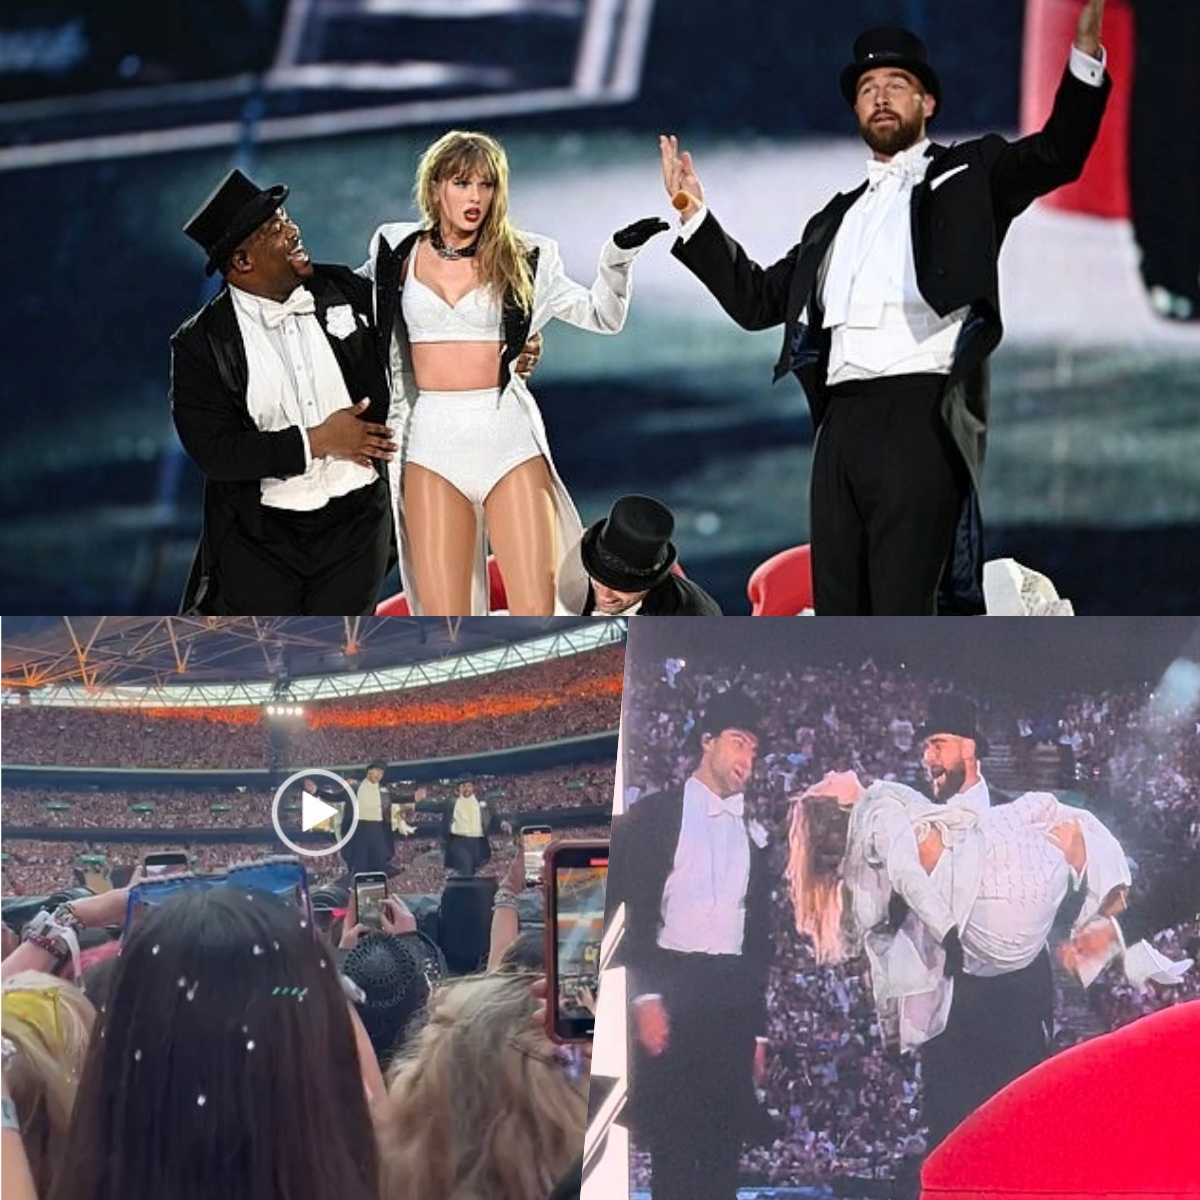 Video: He’s her No1 fan! Taylor Swift’s Superbowl-winning fella Travis Kelce PERFORMS on stage with her at Wembley – carrying her across the stage then fanning her to the delight of the crowd